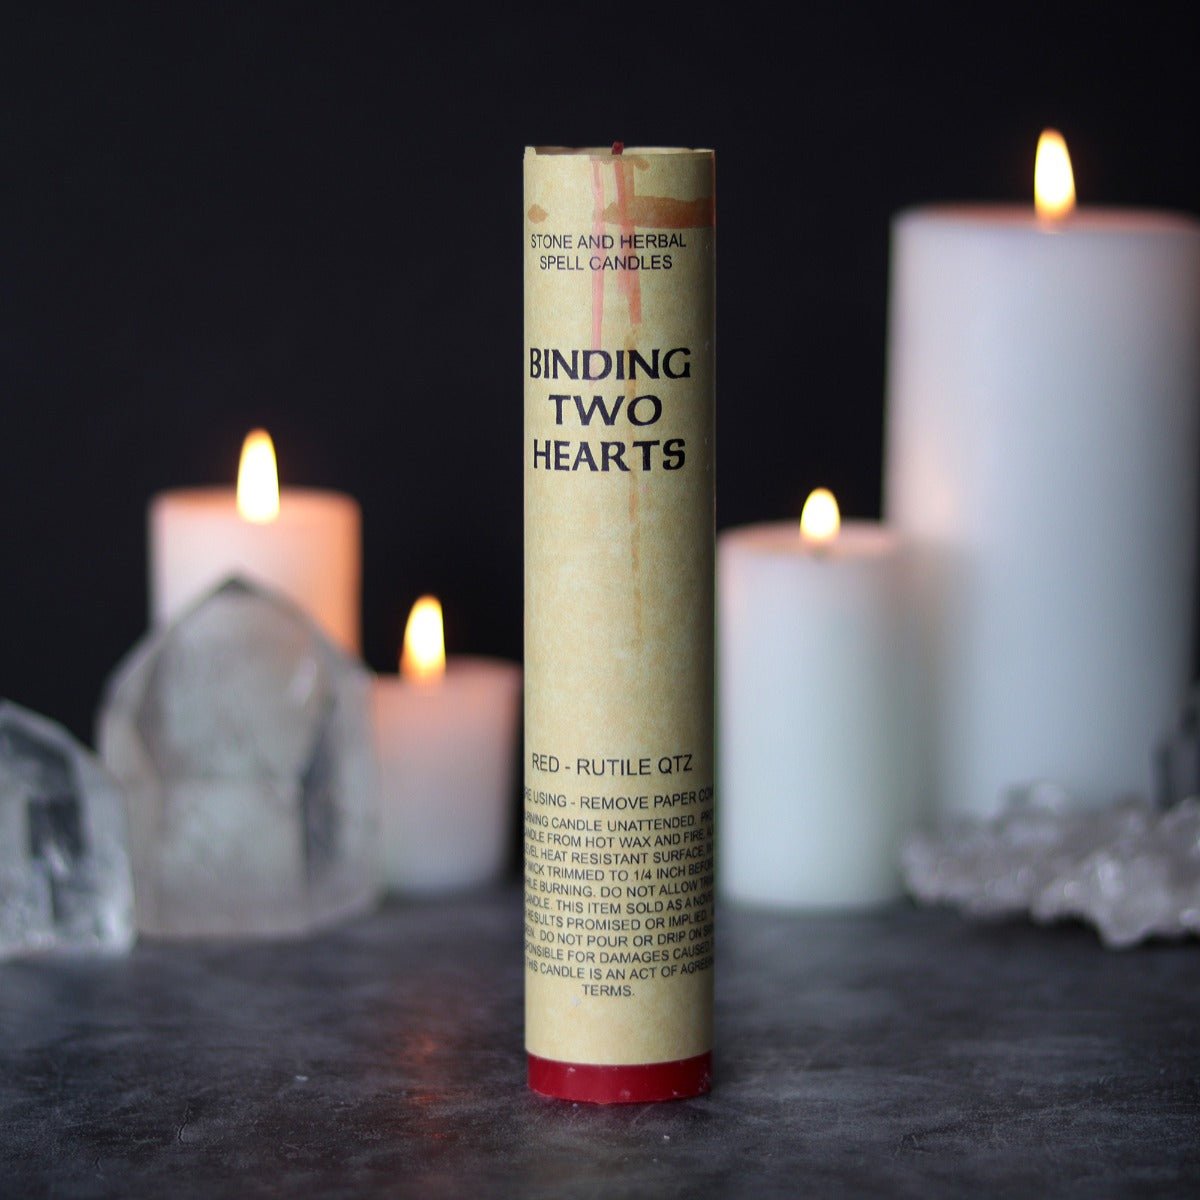 Binding of Two Hearts Spell Candle - 13 Moons